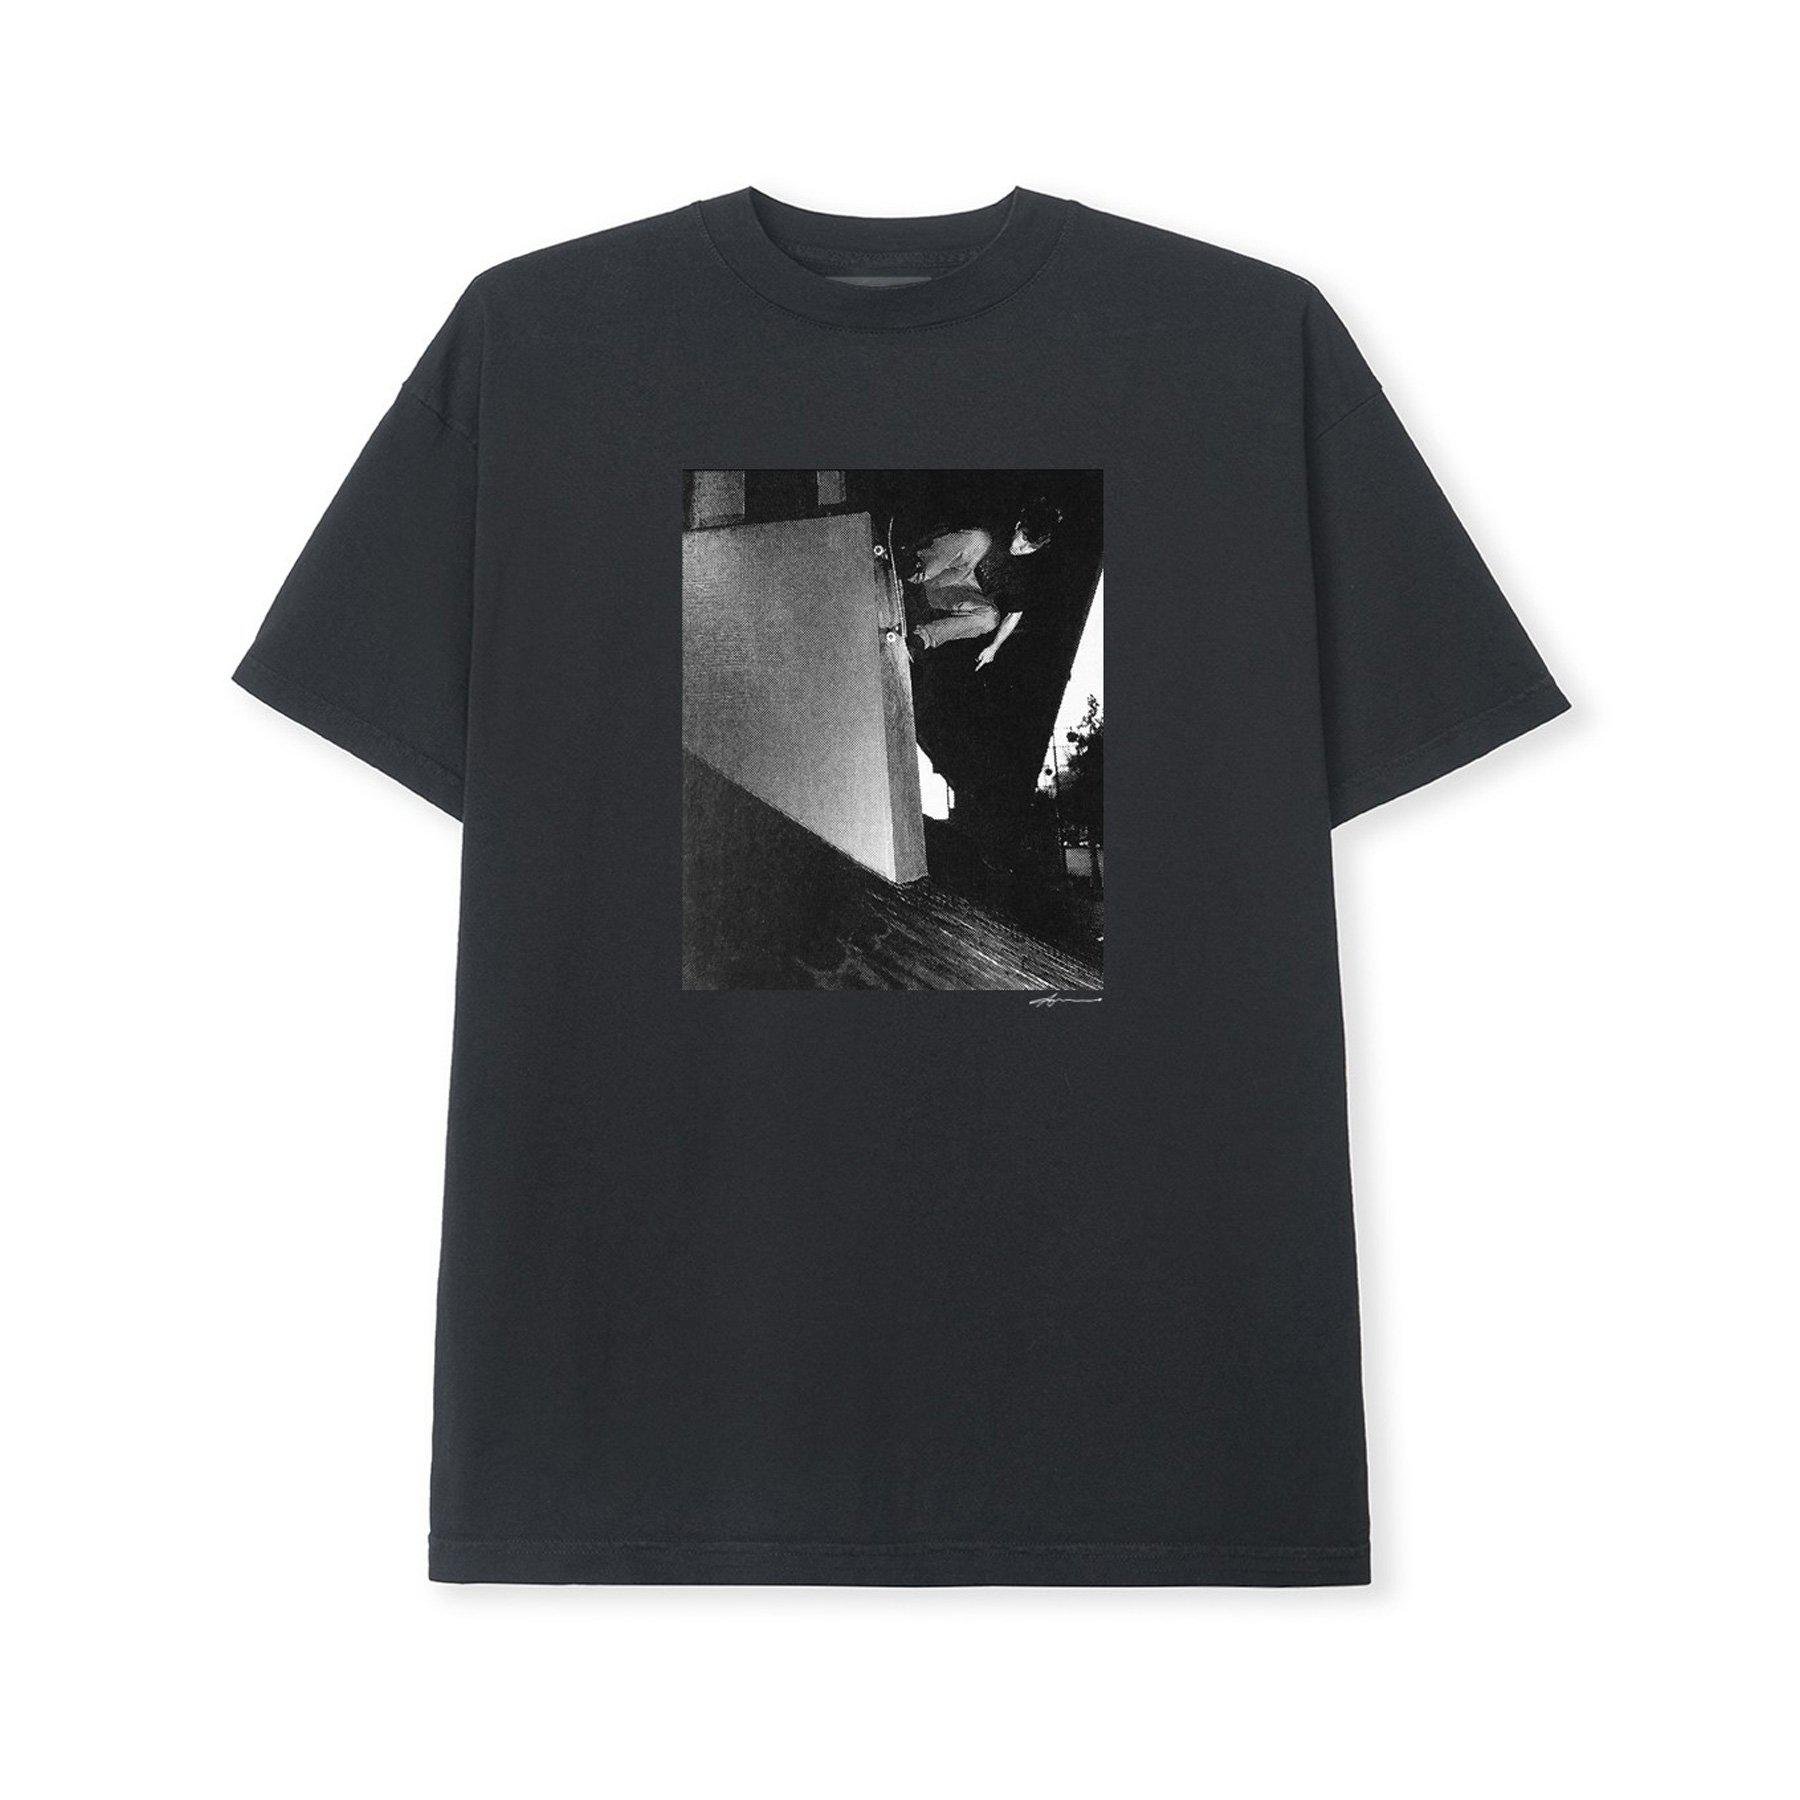 Ari Marcopoulos The Banks T-Shirt (Black) by ARI MARCOPOULOS